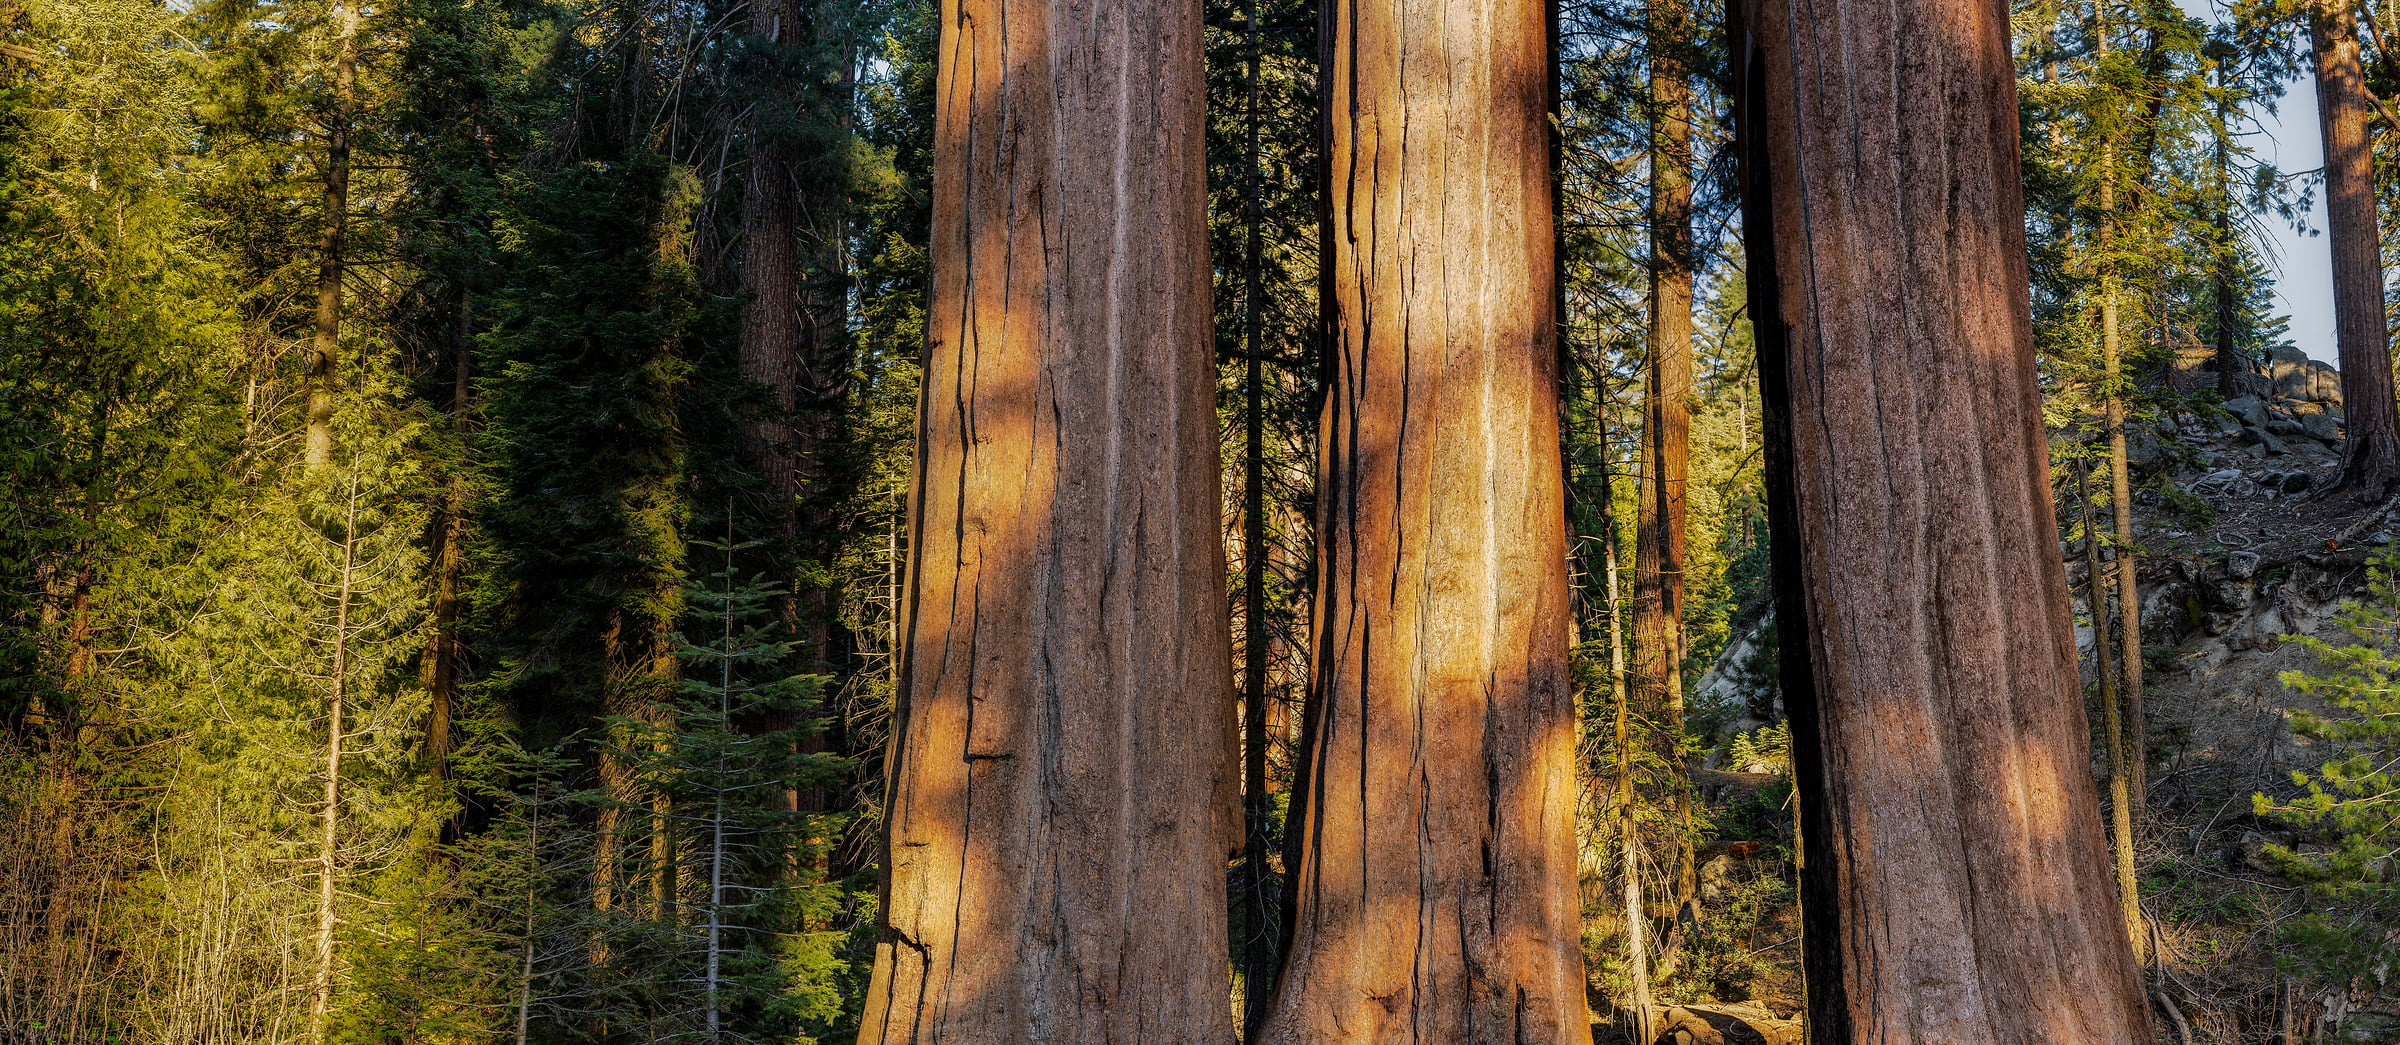 410 megapixels! A very high resolution, large-format VAST photo print of trees in Grants Cove in Kings Canyon National Park; nature photograph created by Chris Blake in Kings Canyon National Park, California.